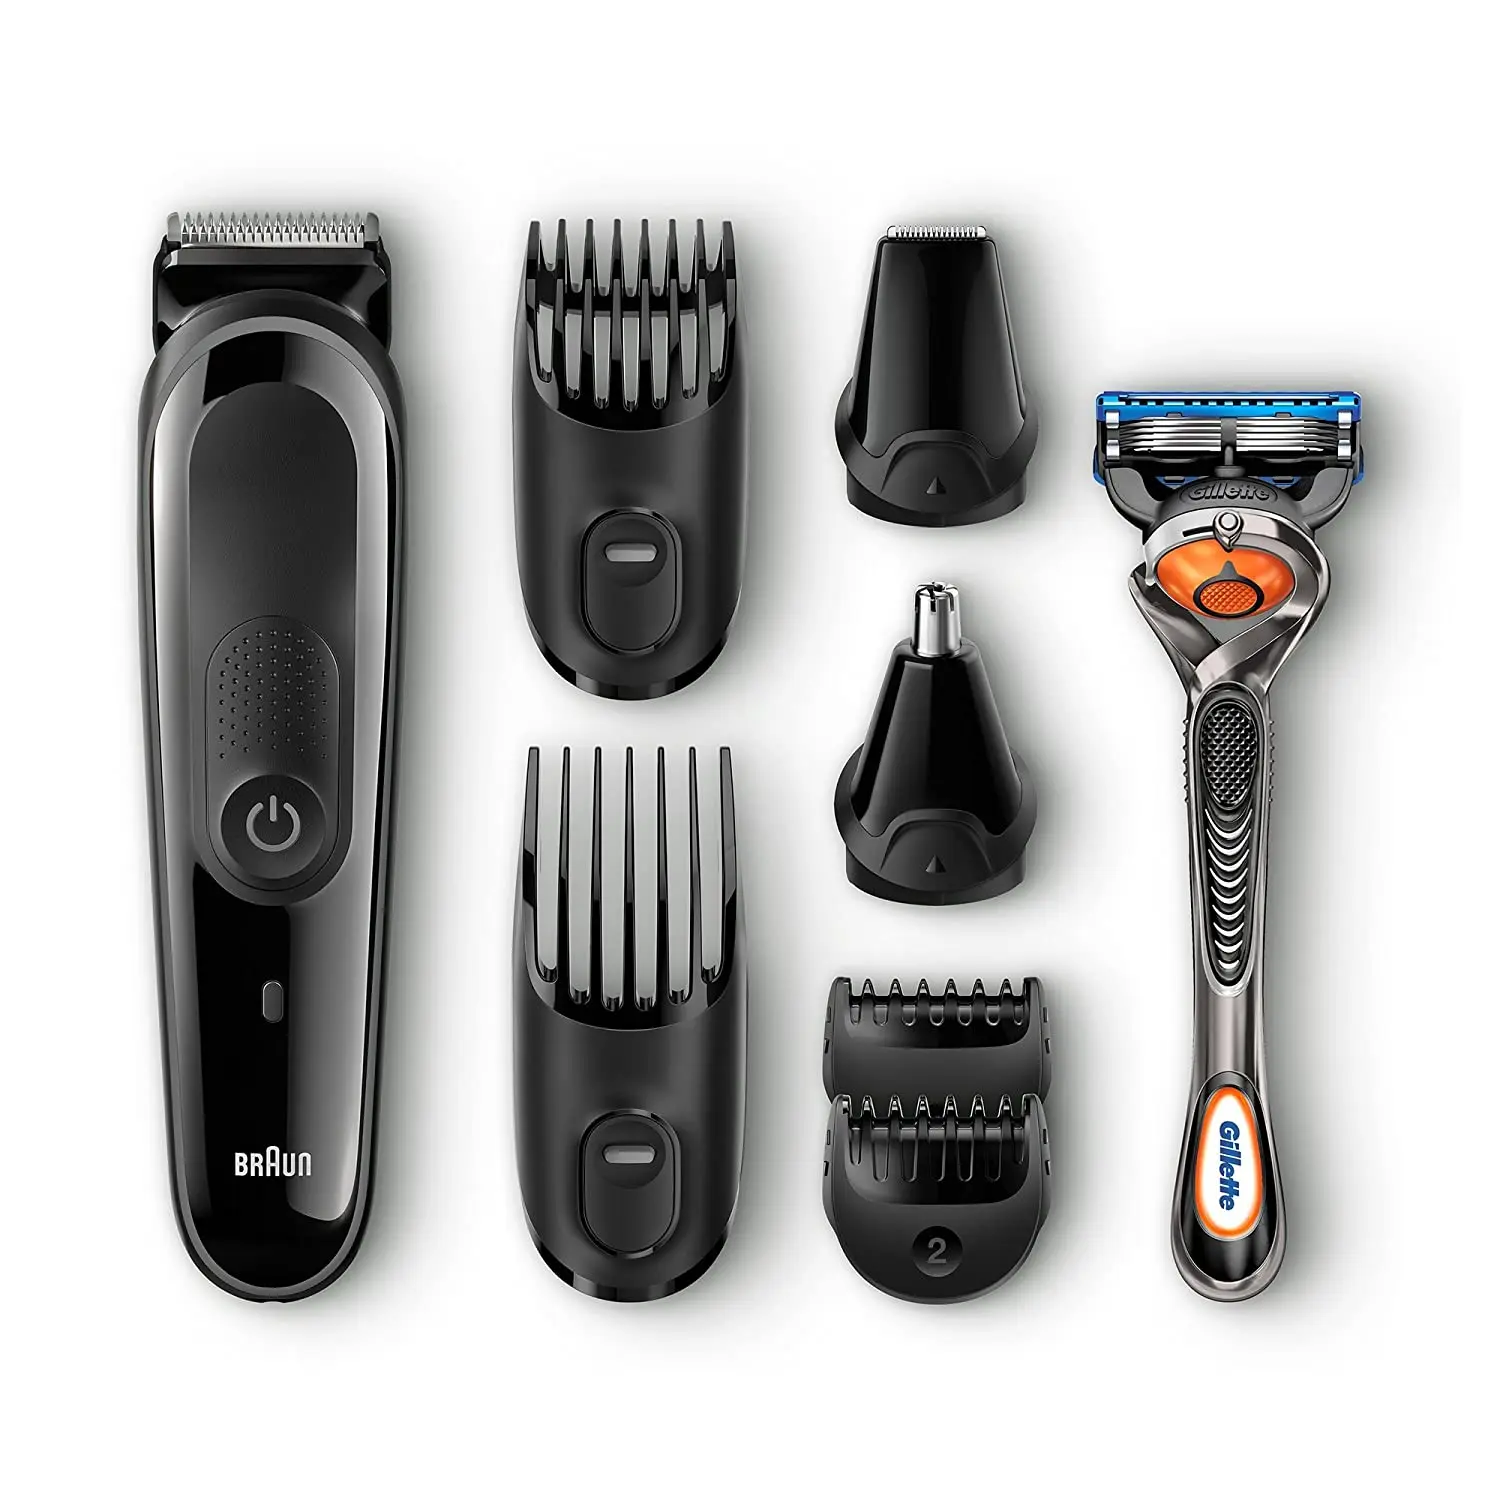 Braun MGK 5060 Multi grooming kit 8 in one Trimmer for precision styling head to toe Pack 1 MGK5060|Electric - AliExpress